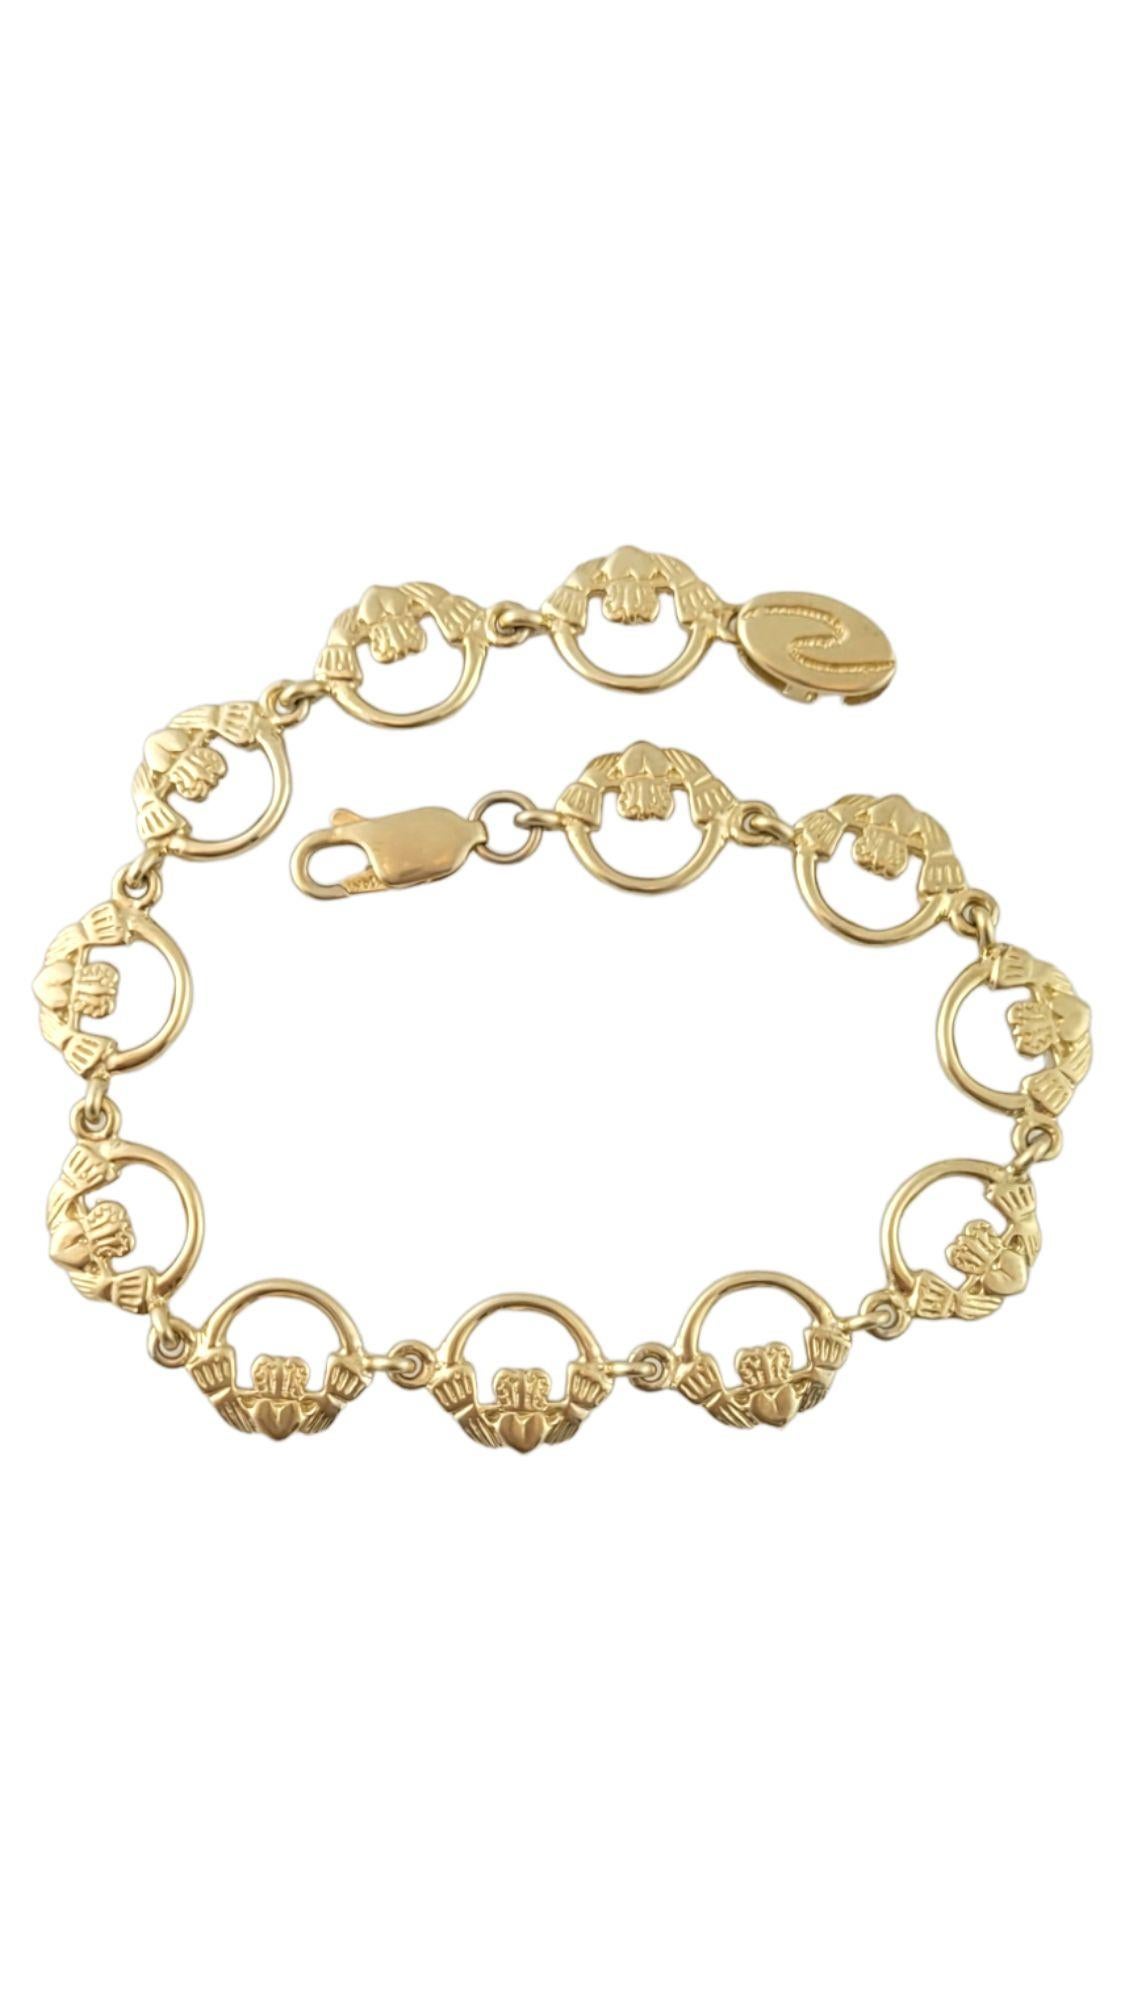 Gorgeous Claddagh bracelet made of 14K yellow gold!

Size: 7